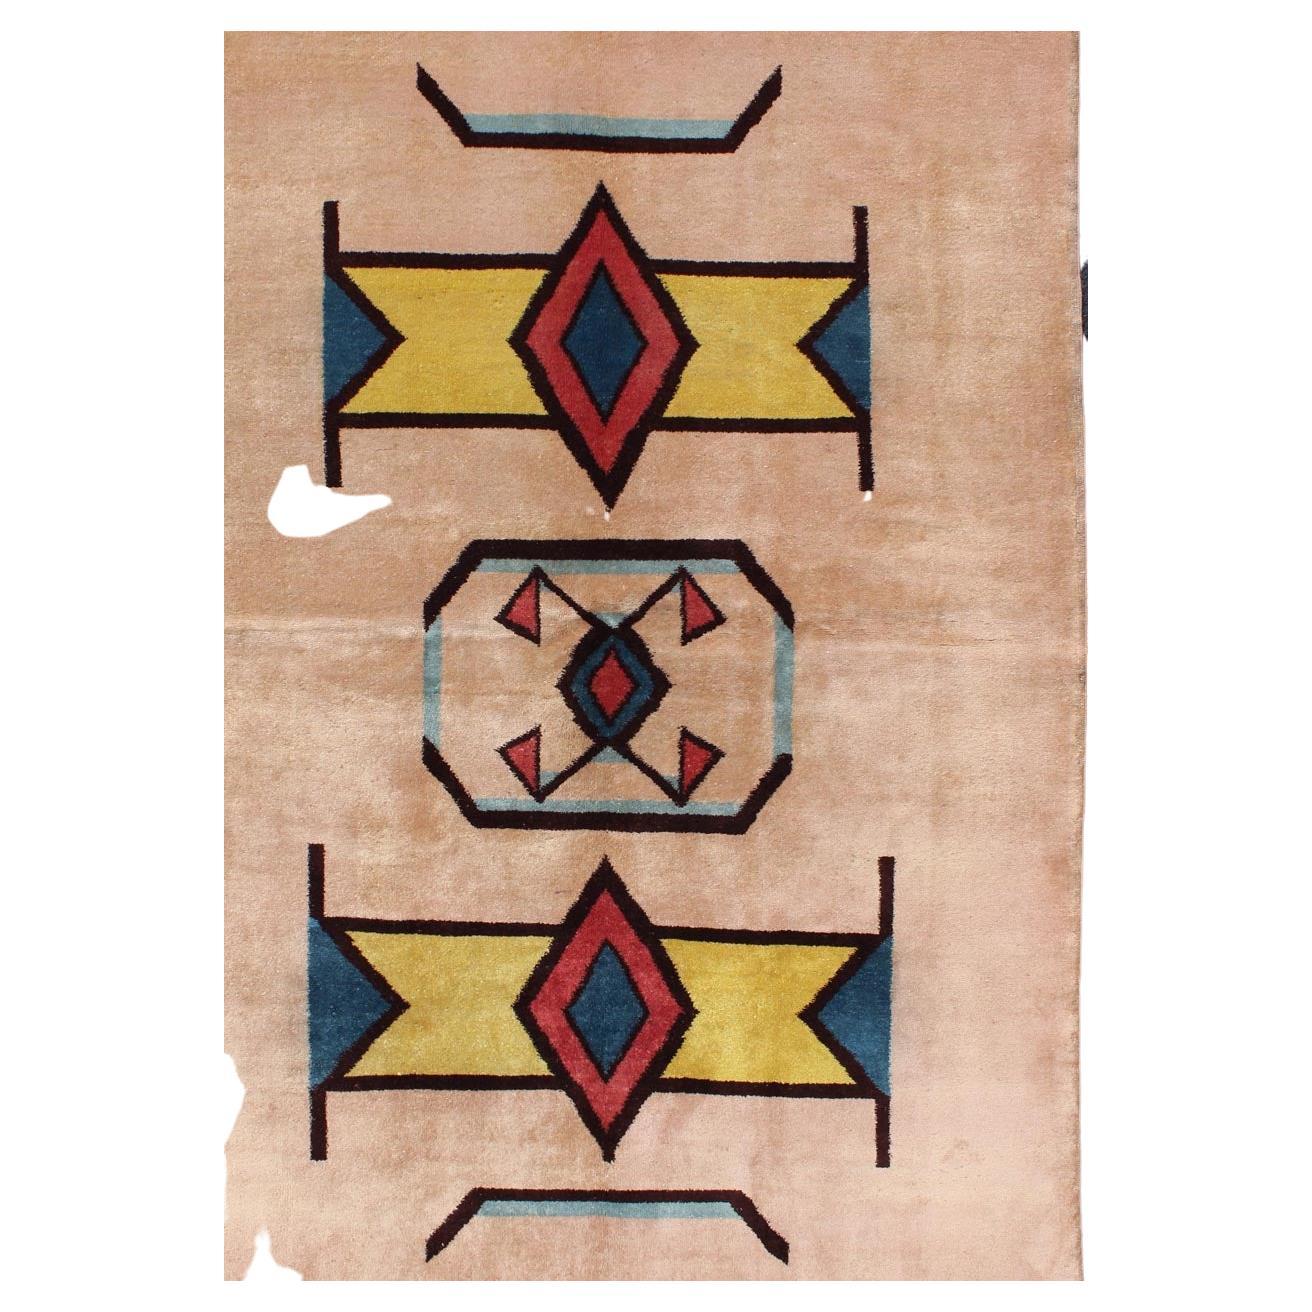 Geometric Mid-Century Modern rug with Art-Deco design, TU-MTU-02, Vintage Mid-Century Rug with Deco Design

Set on light color Champaign background, This unique mid century modern design rug displays a geometric design and multi colors such as